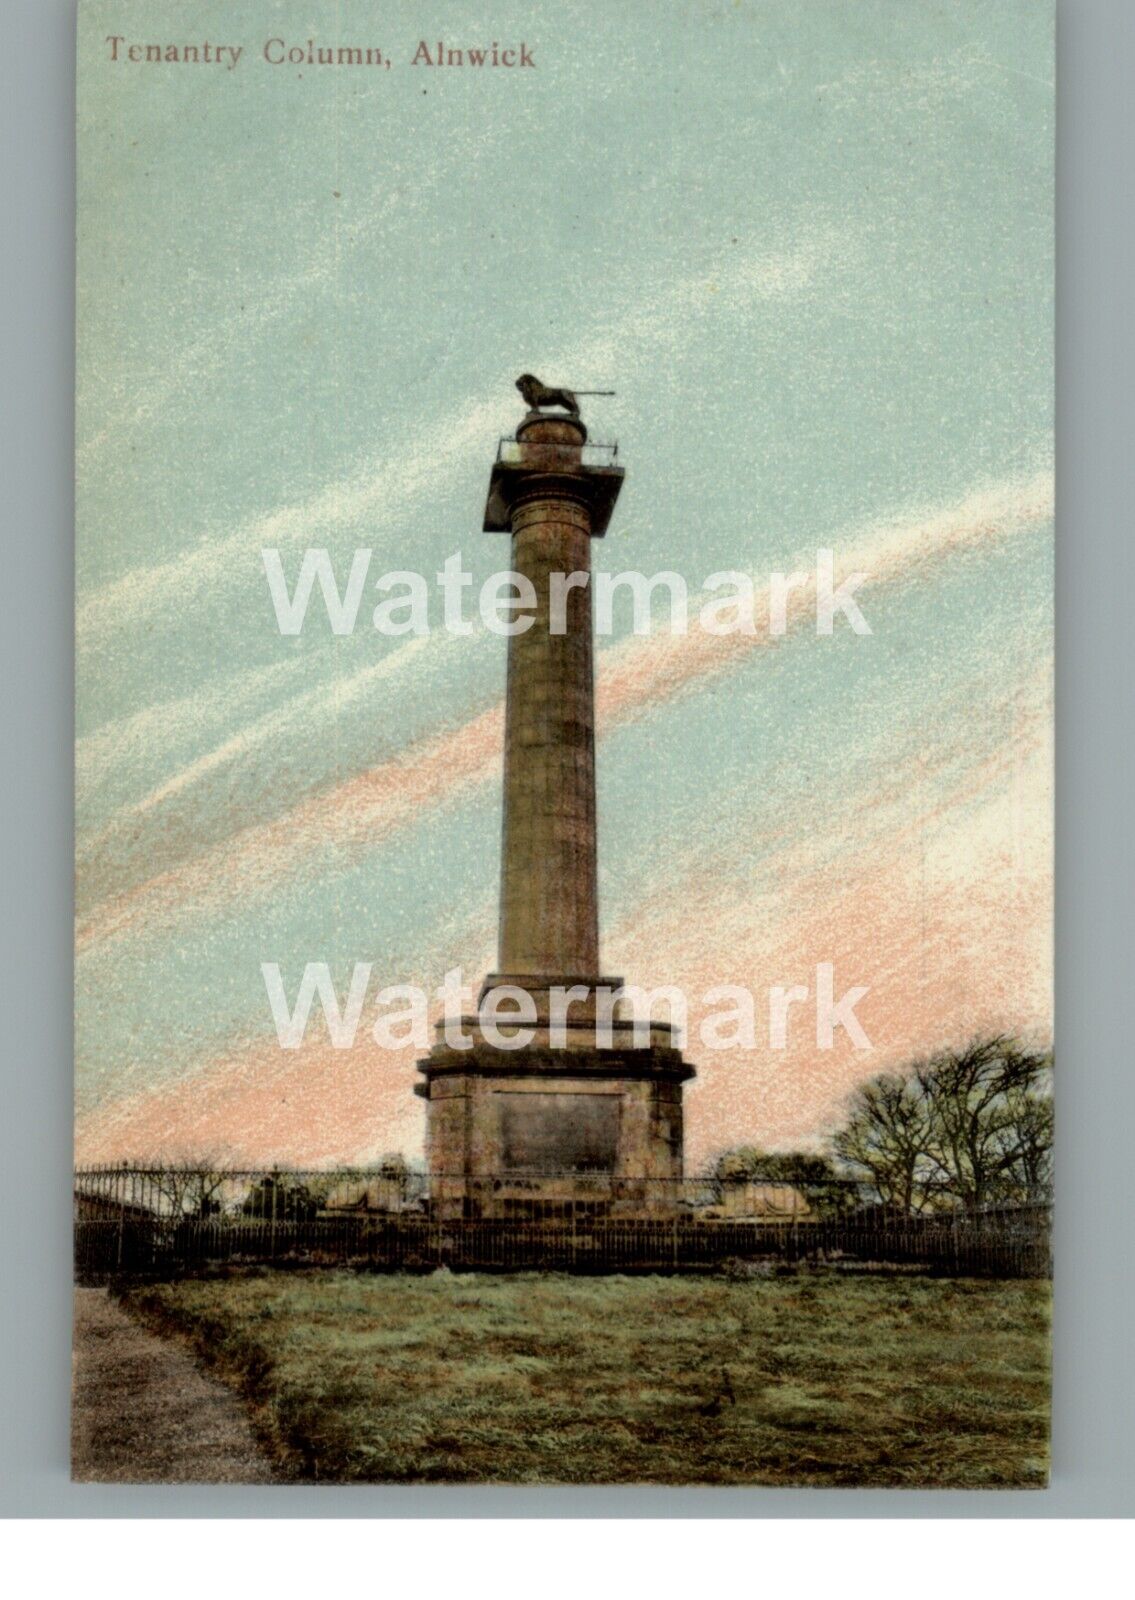 House Clearance - A1244. Alnwick. Tenantry Column. Local Publisher